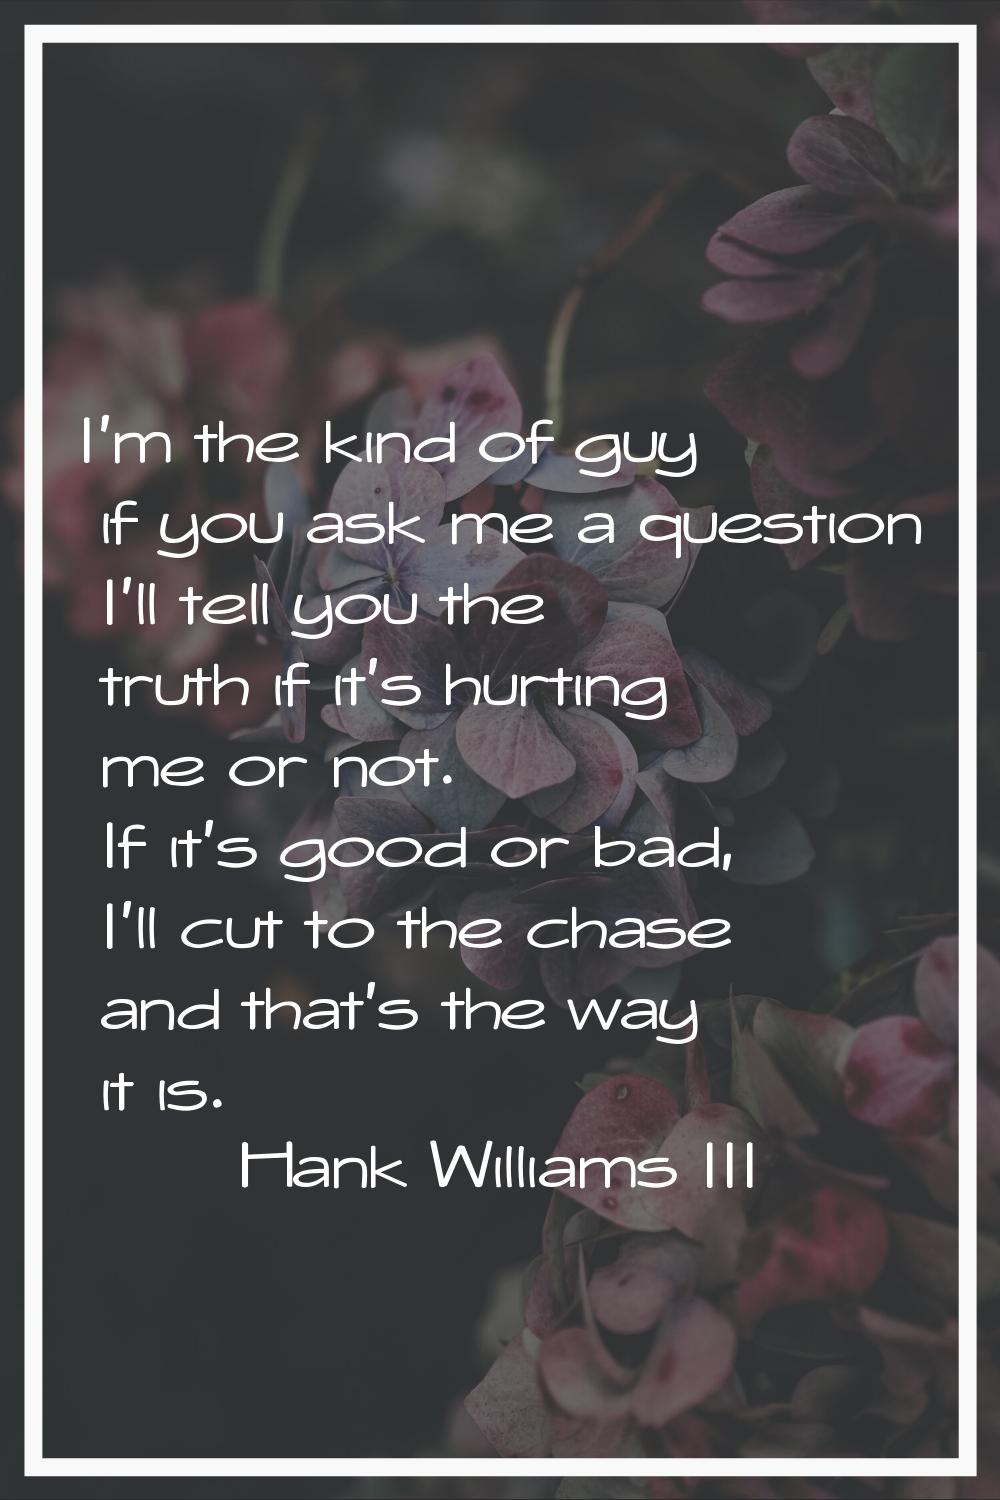 I'm the kind of guy if you ask me a question I'll tell you the truth if it's hurting me or not. If 